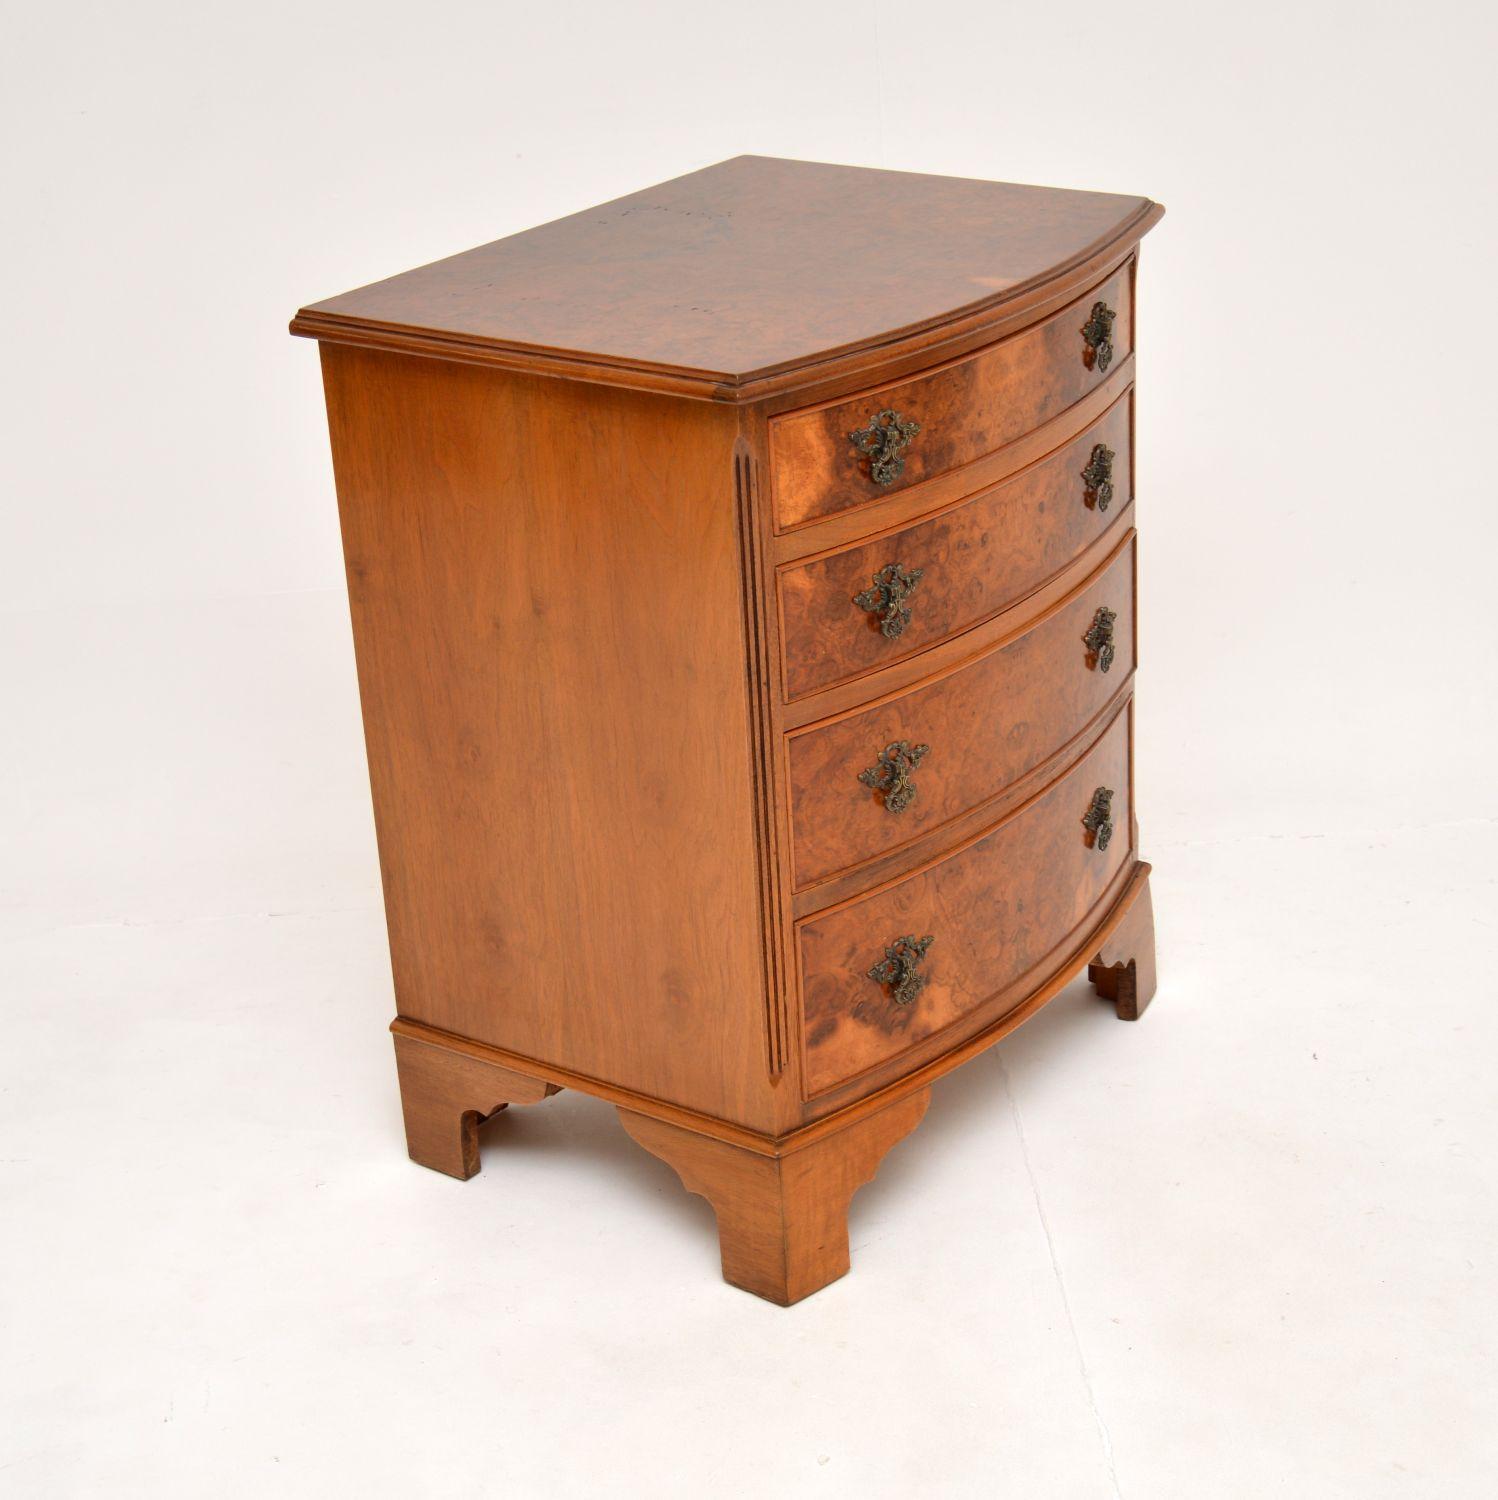 Georgian Antique Bow Front Chest of Drawers in Burr Walnut